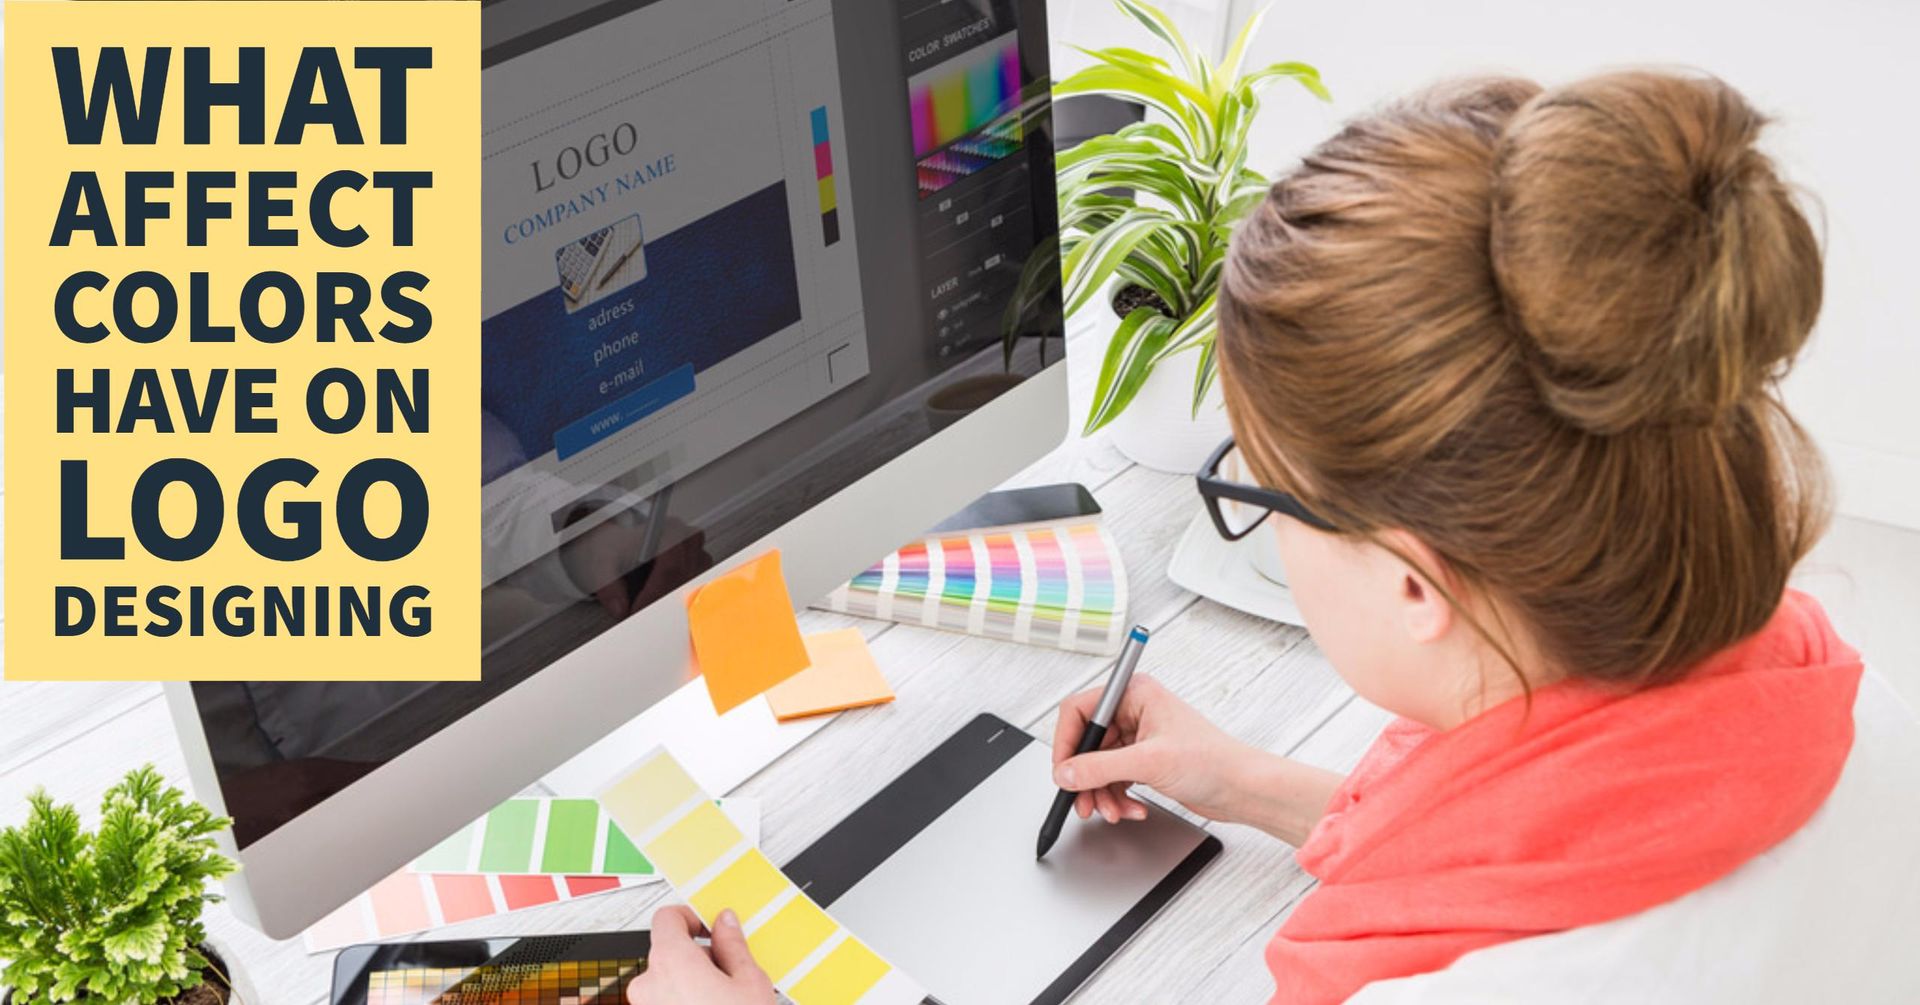 What Affect Colors Have On Logo Designing